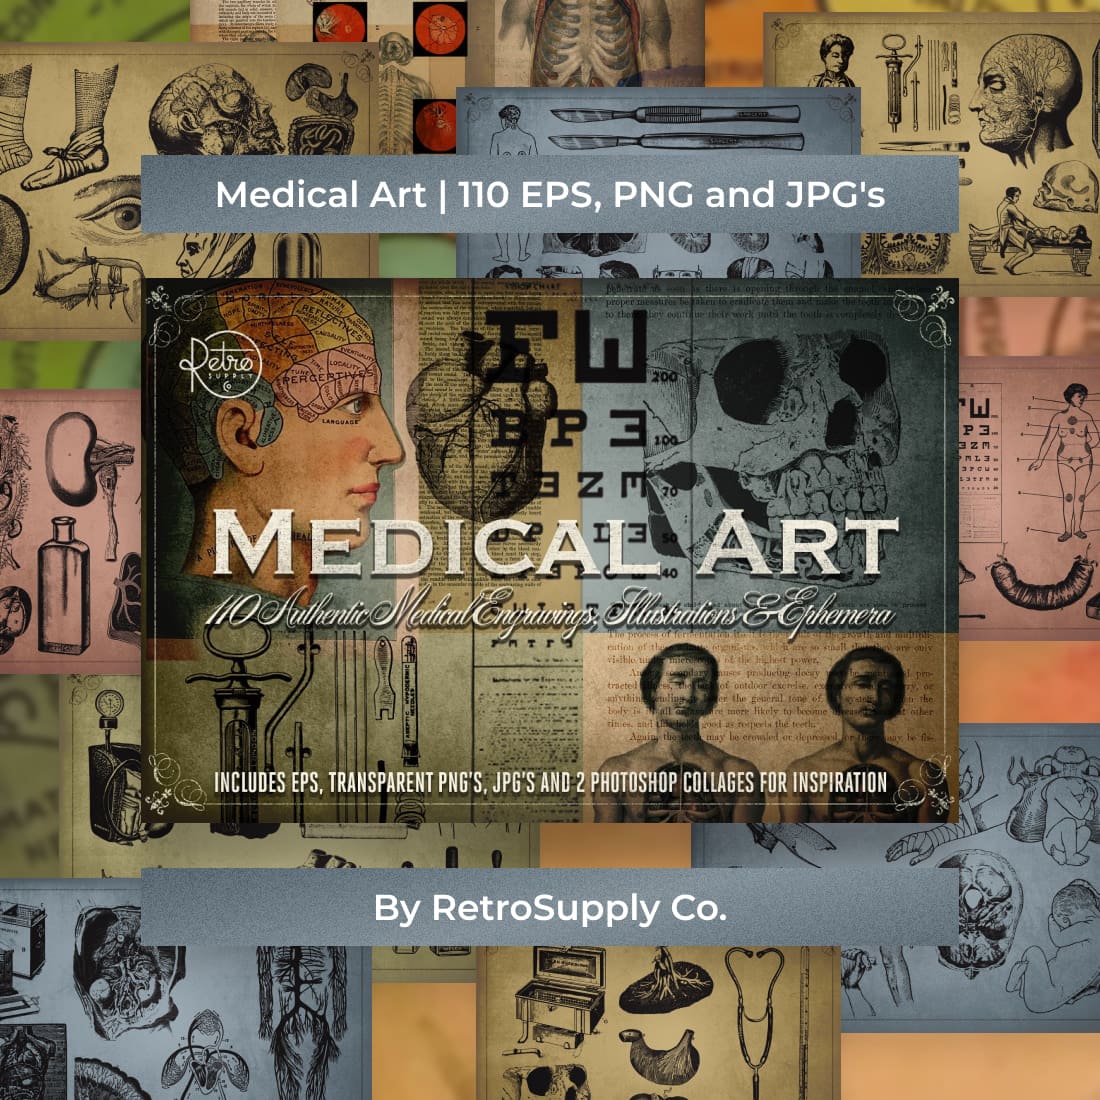 medical art 110 eps png and jpgs cover image.